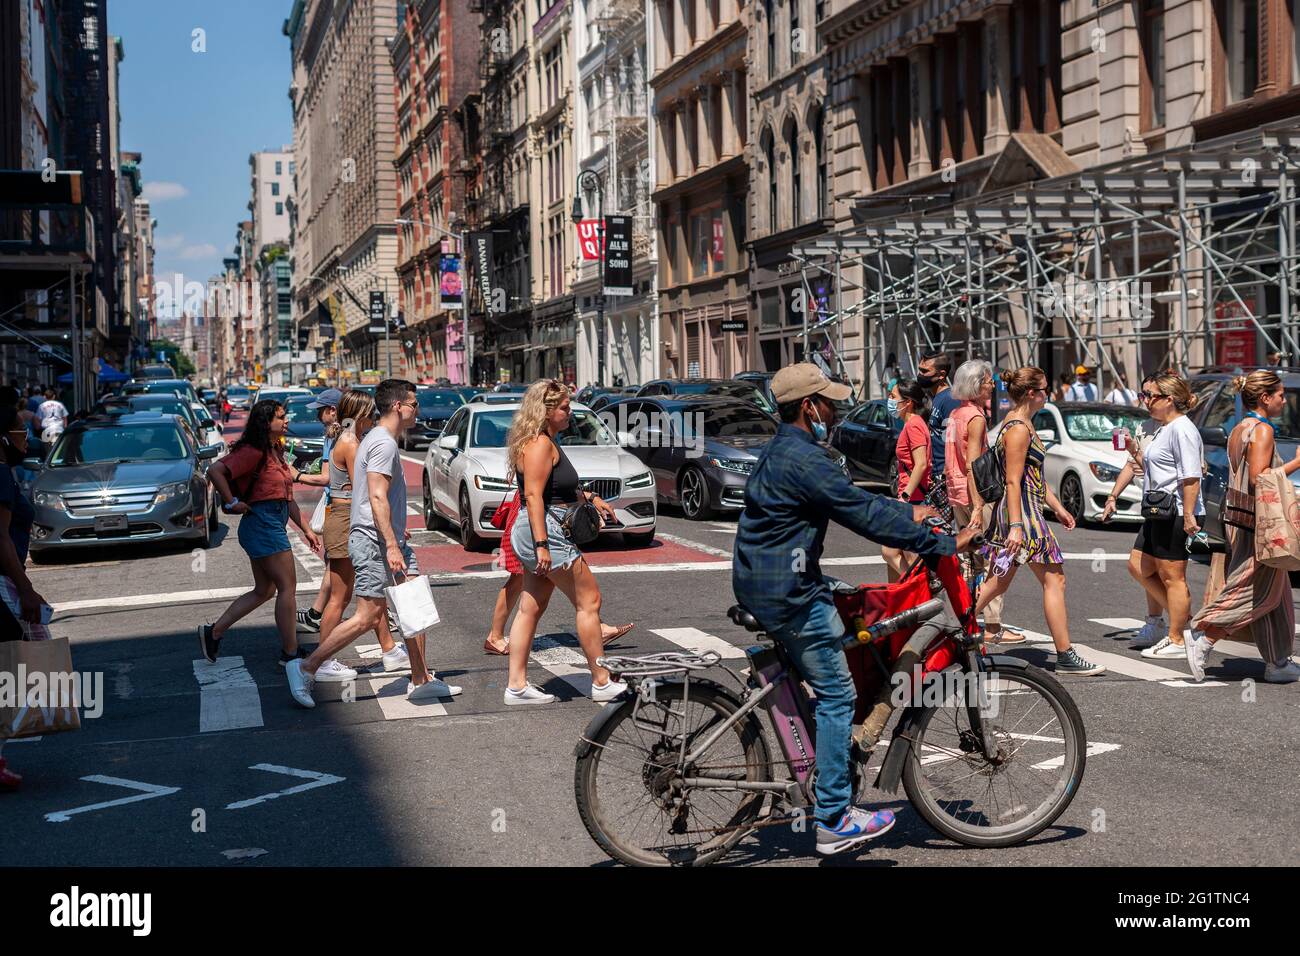 New York, USA. 06th June, 2021. Shoppers in the Soho neighborhood in New York on Sunday, June 6, 2021. New York has relaxed mask mandates allowing most outdoor activities to be mask free as well as many indoor settings, with caveats. (ÂPhoto by Richard B. Levine) Credit: Sipa USA/Alamy Live News Stock Photo